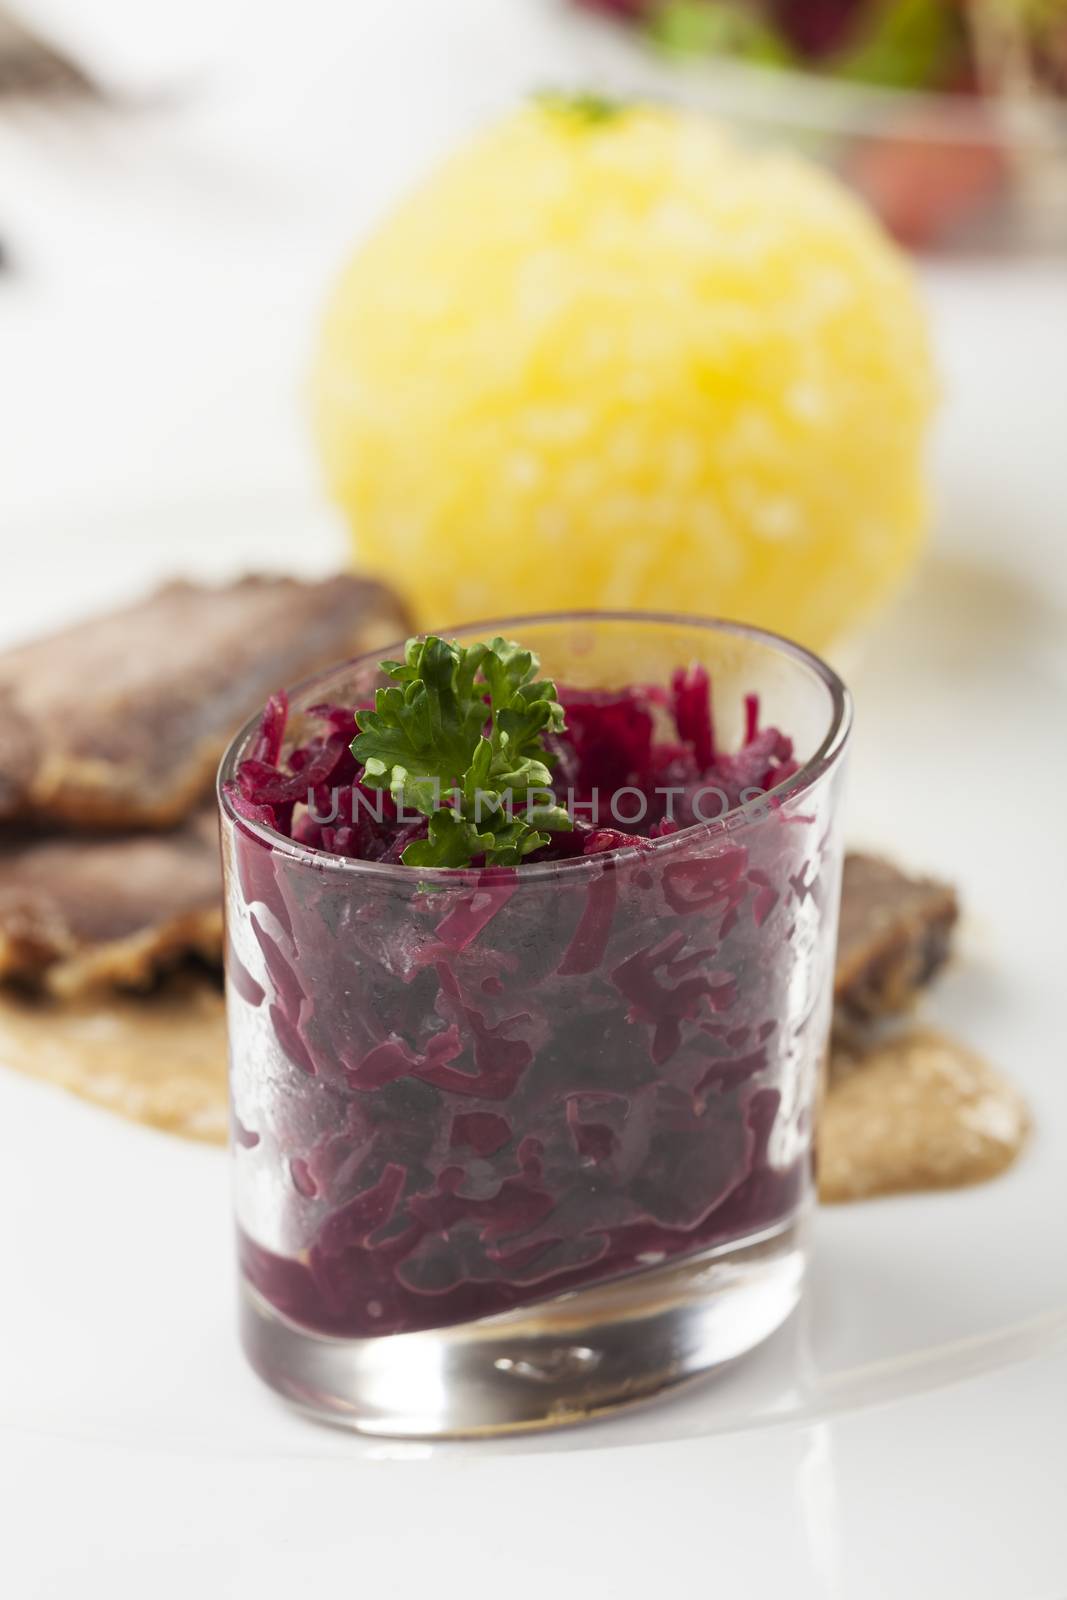 red cabbage and german sauerbraten